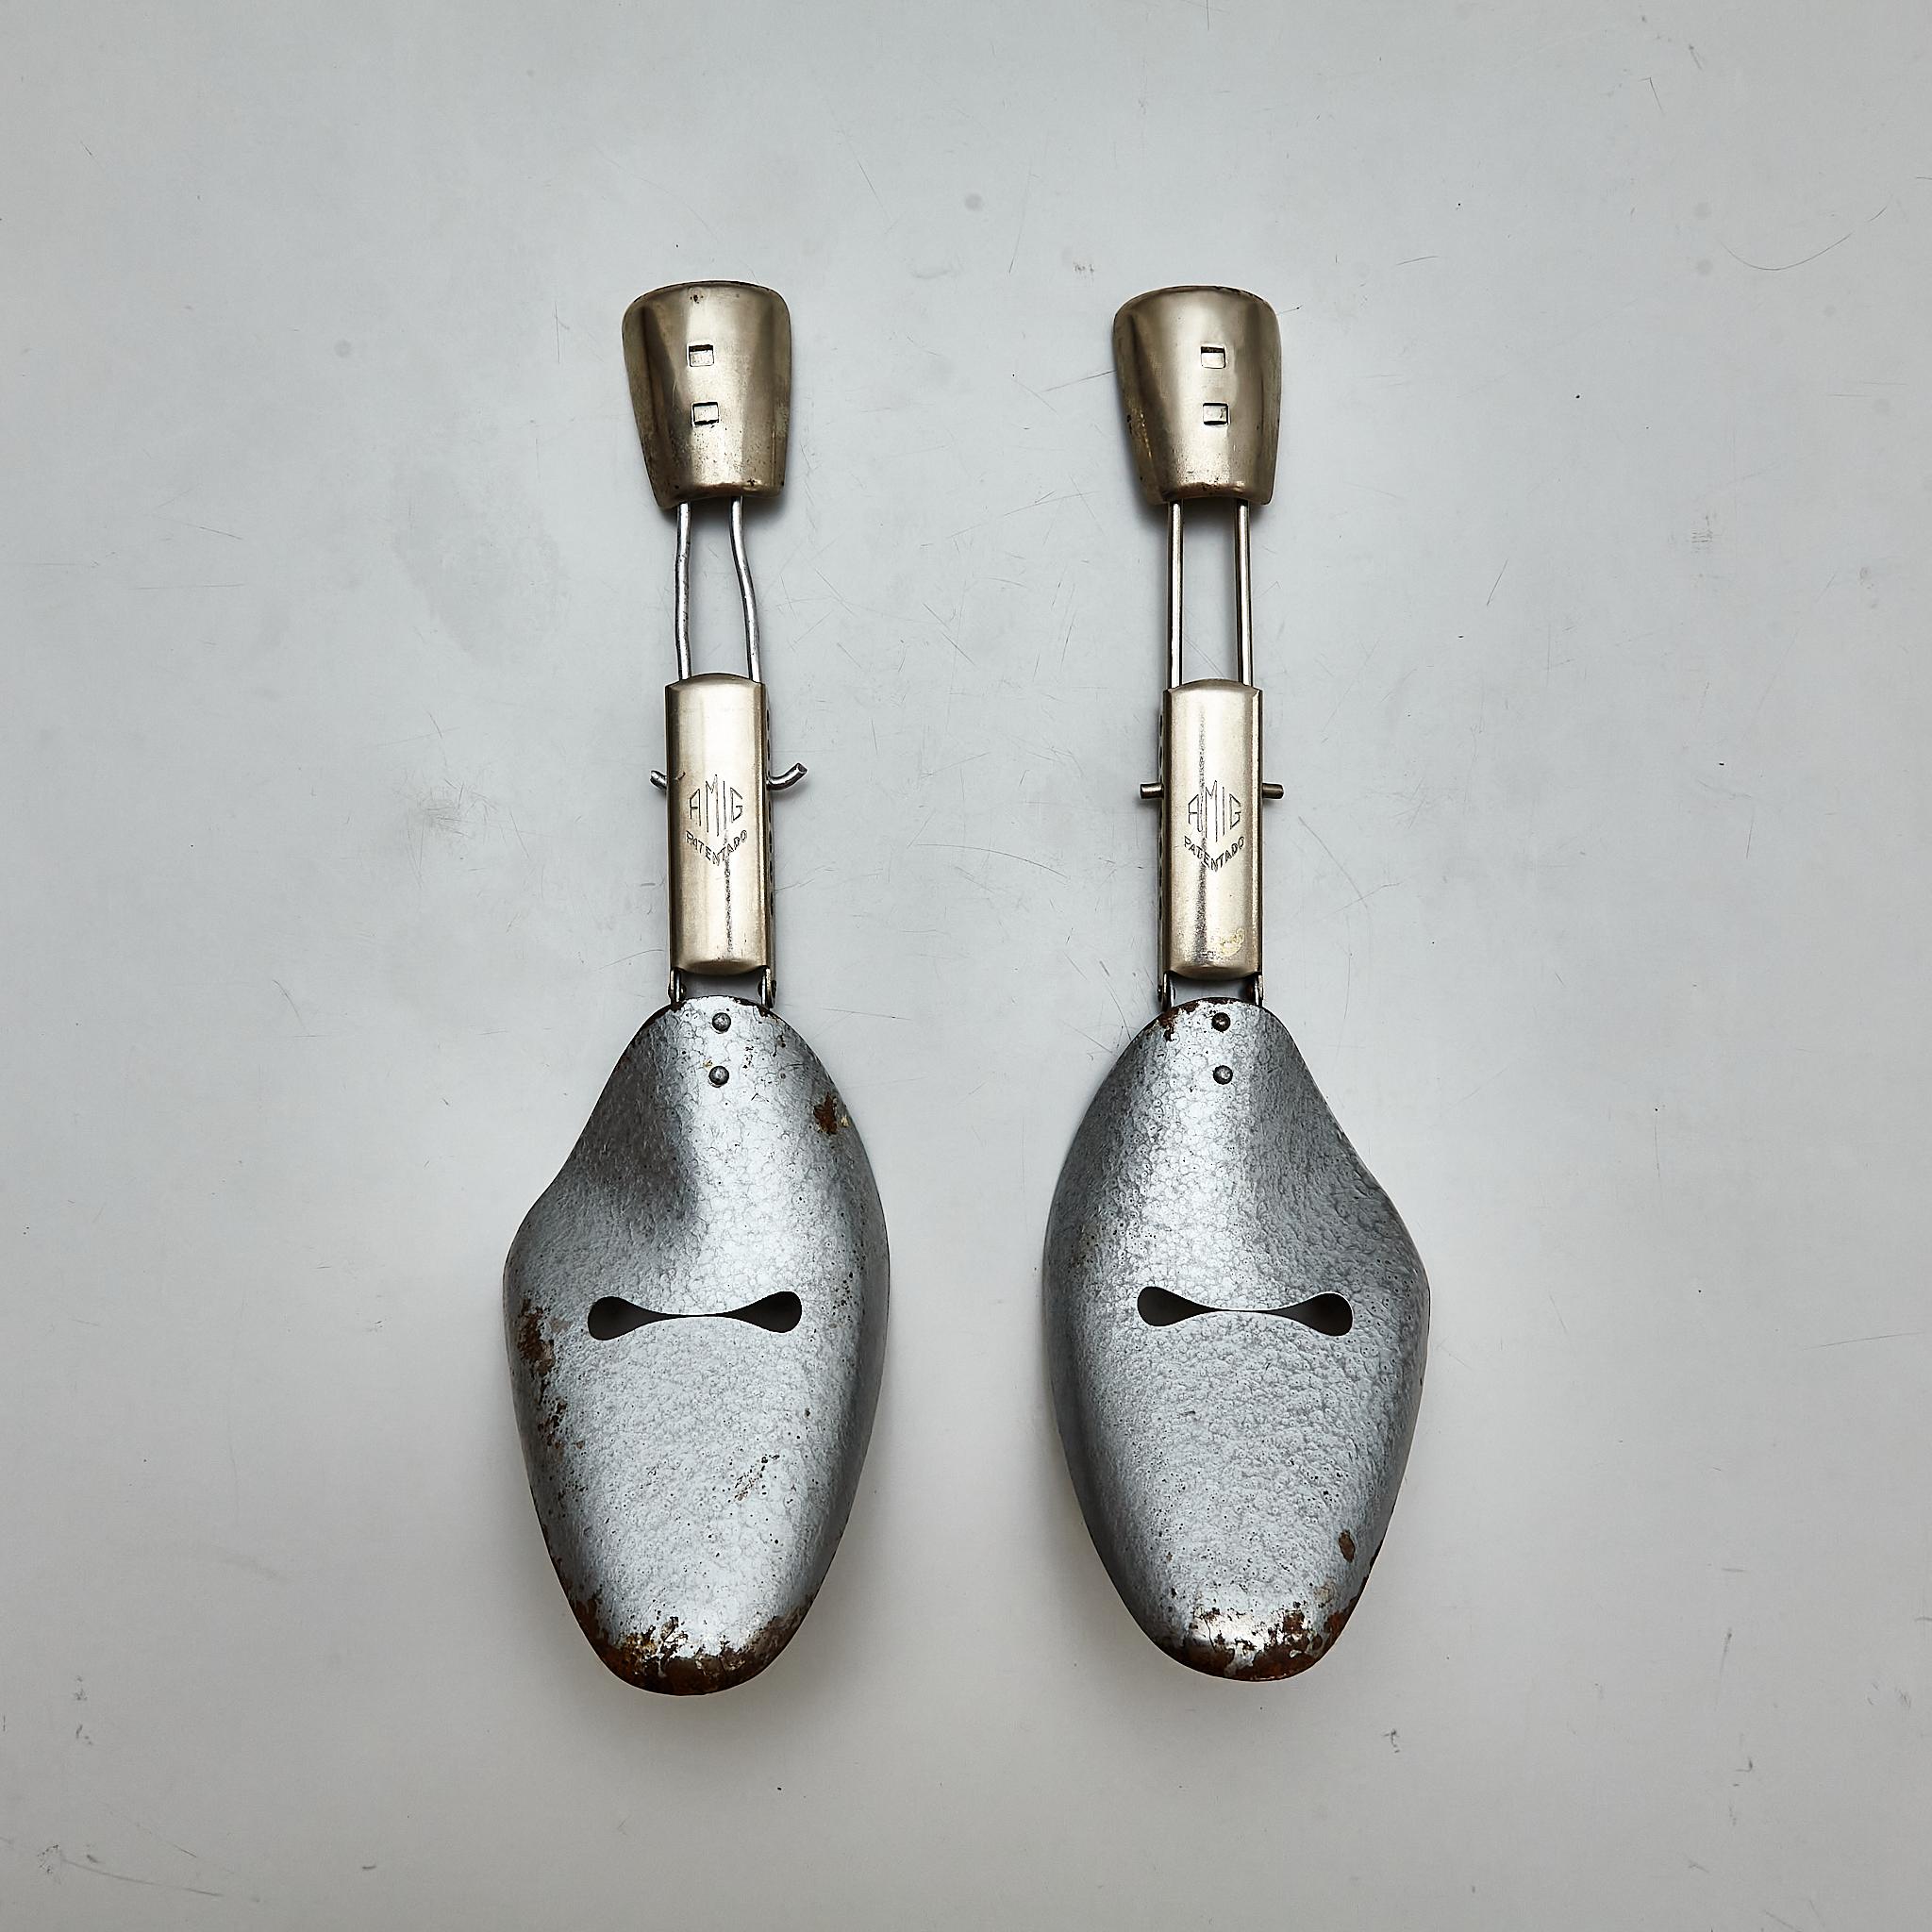 Unearth a piece of shoemaking history with this pair of vintage metal shoe trees, meticulously crafted in Spain circa 1960 and sealed with AMD's patented innovation. These shoe trees have aged gracefully, bearing some traces of rust and minor wear,